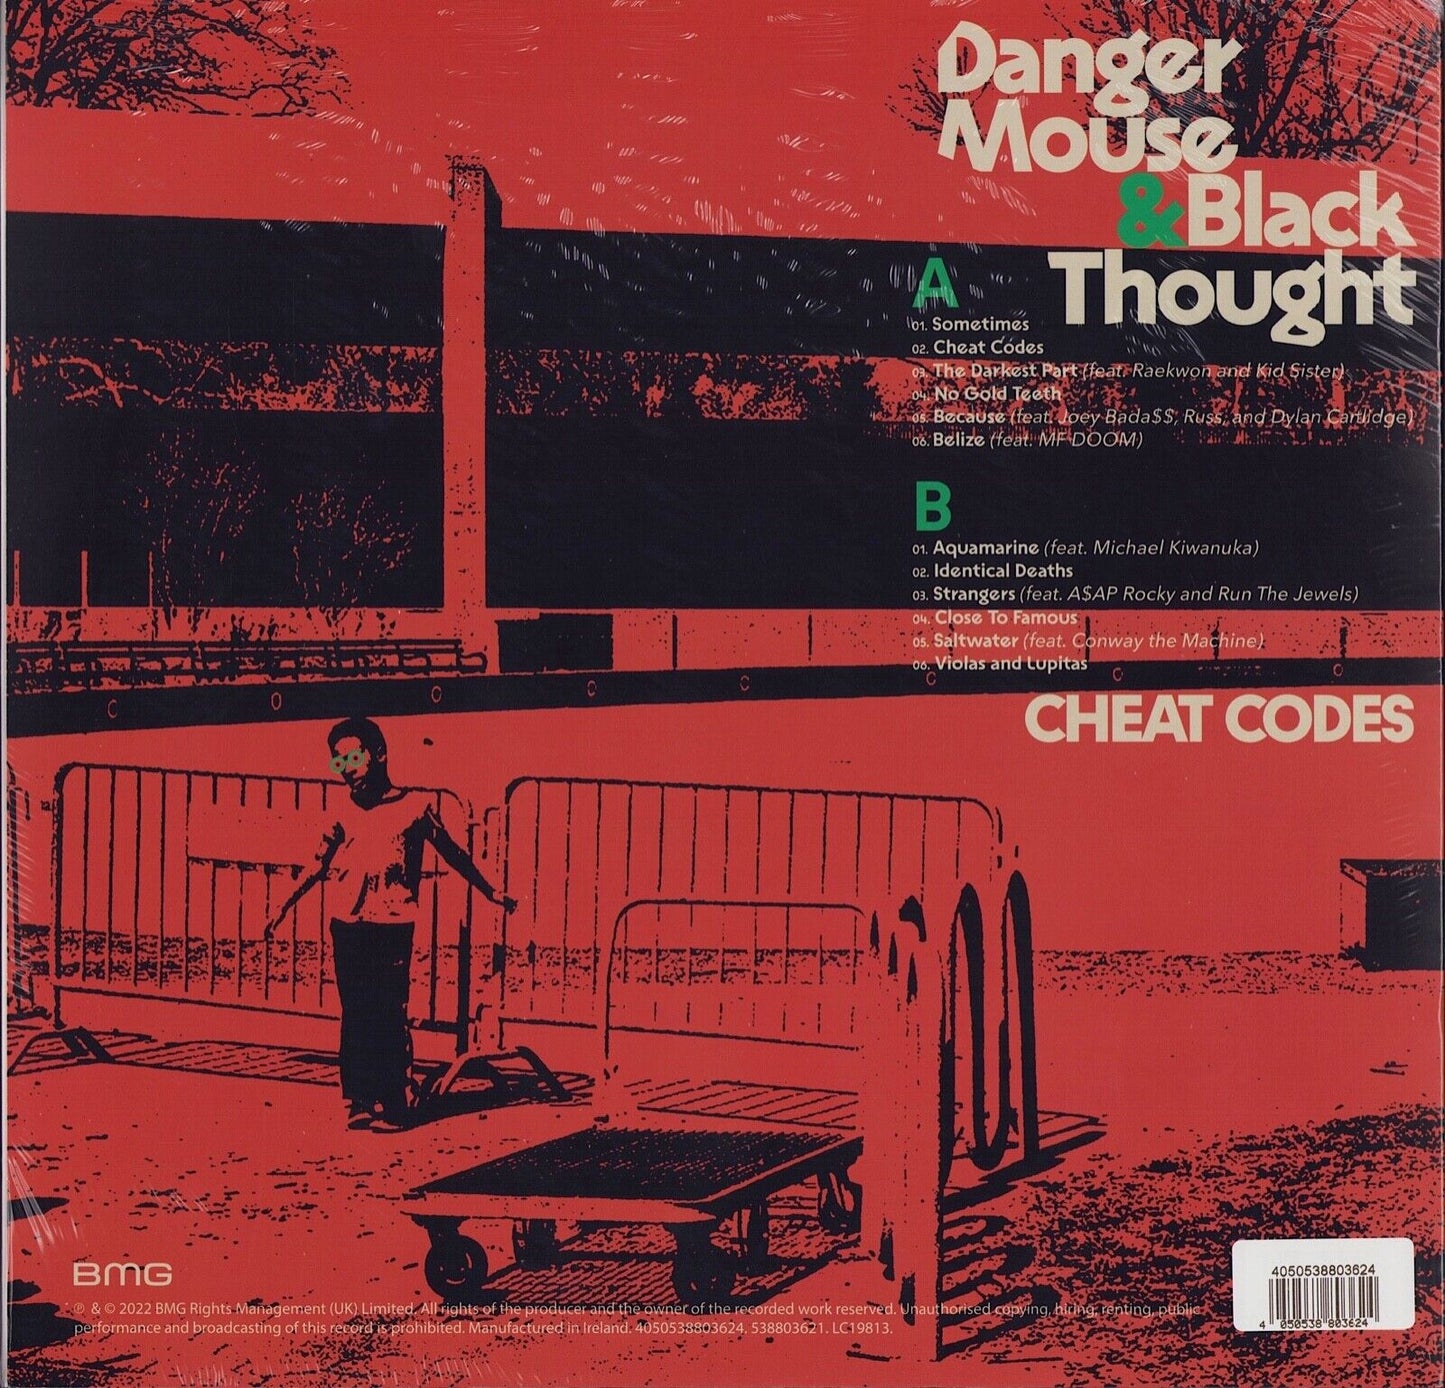 Danger Mouse, Black Thought - Cheat Codes Red Vinyl LP + CD Limited Edition